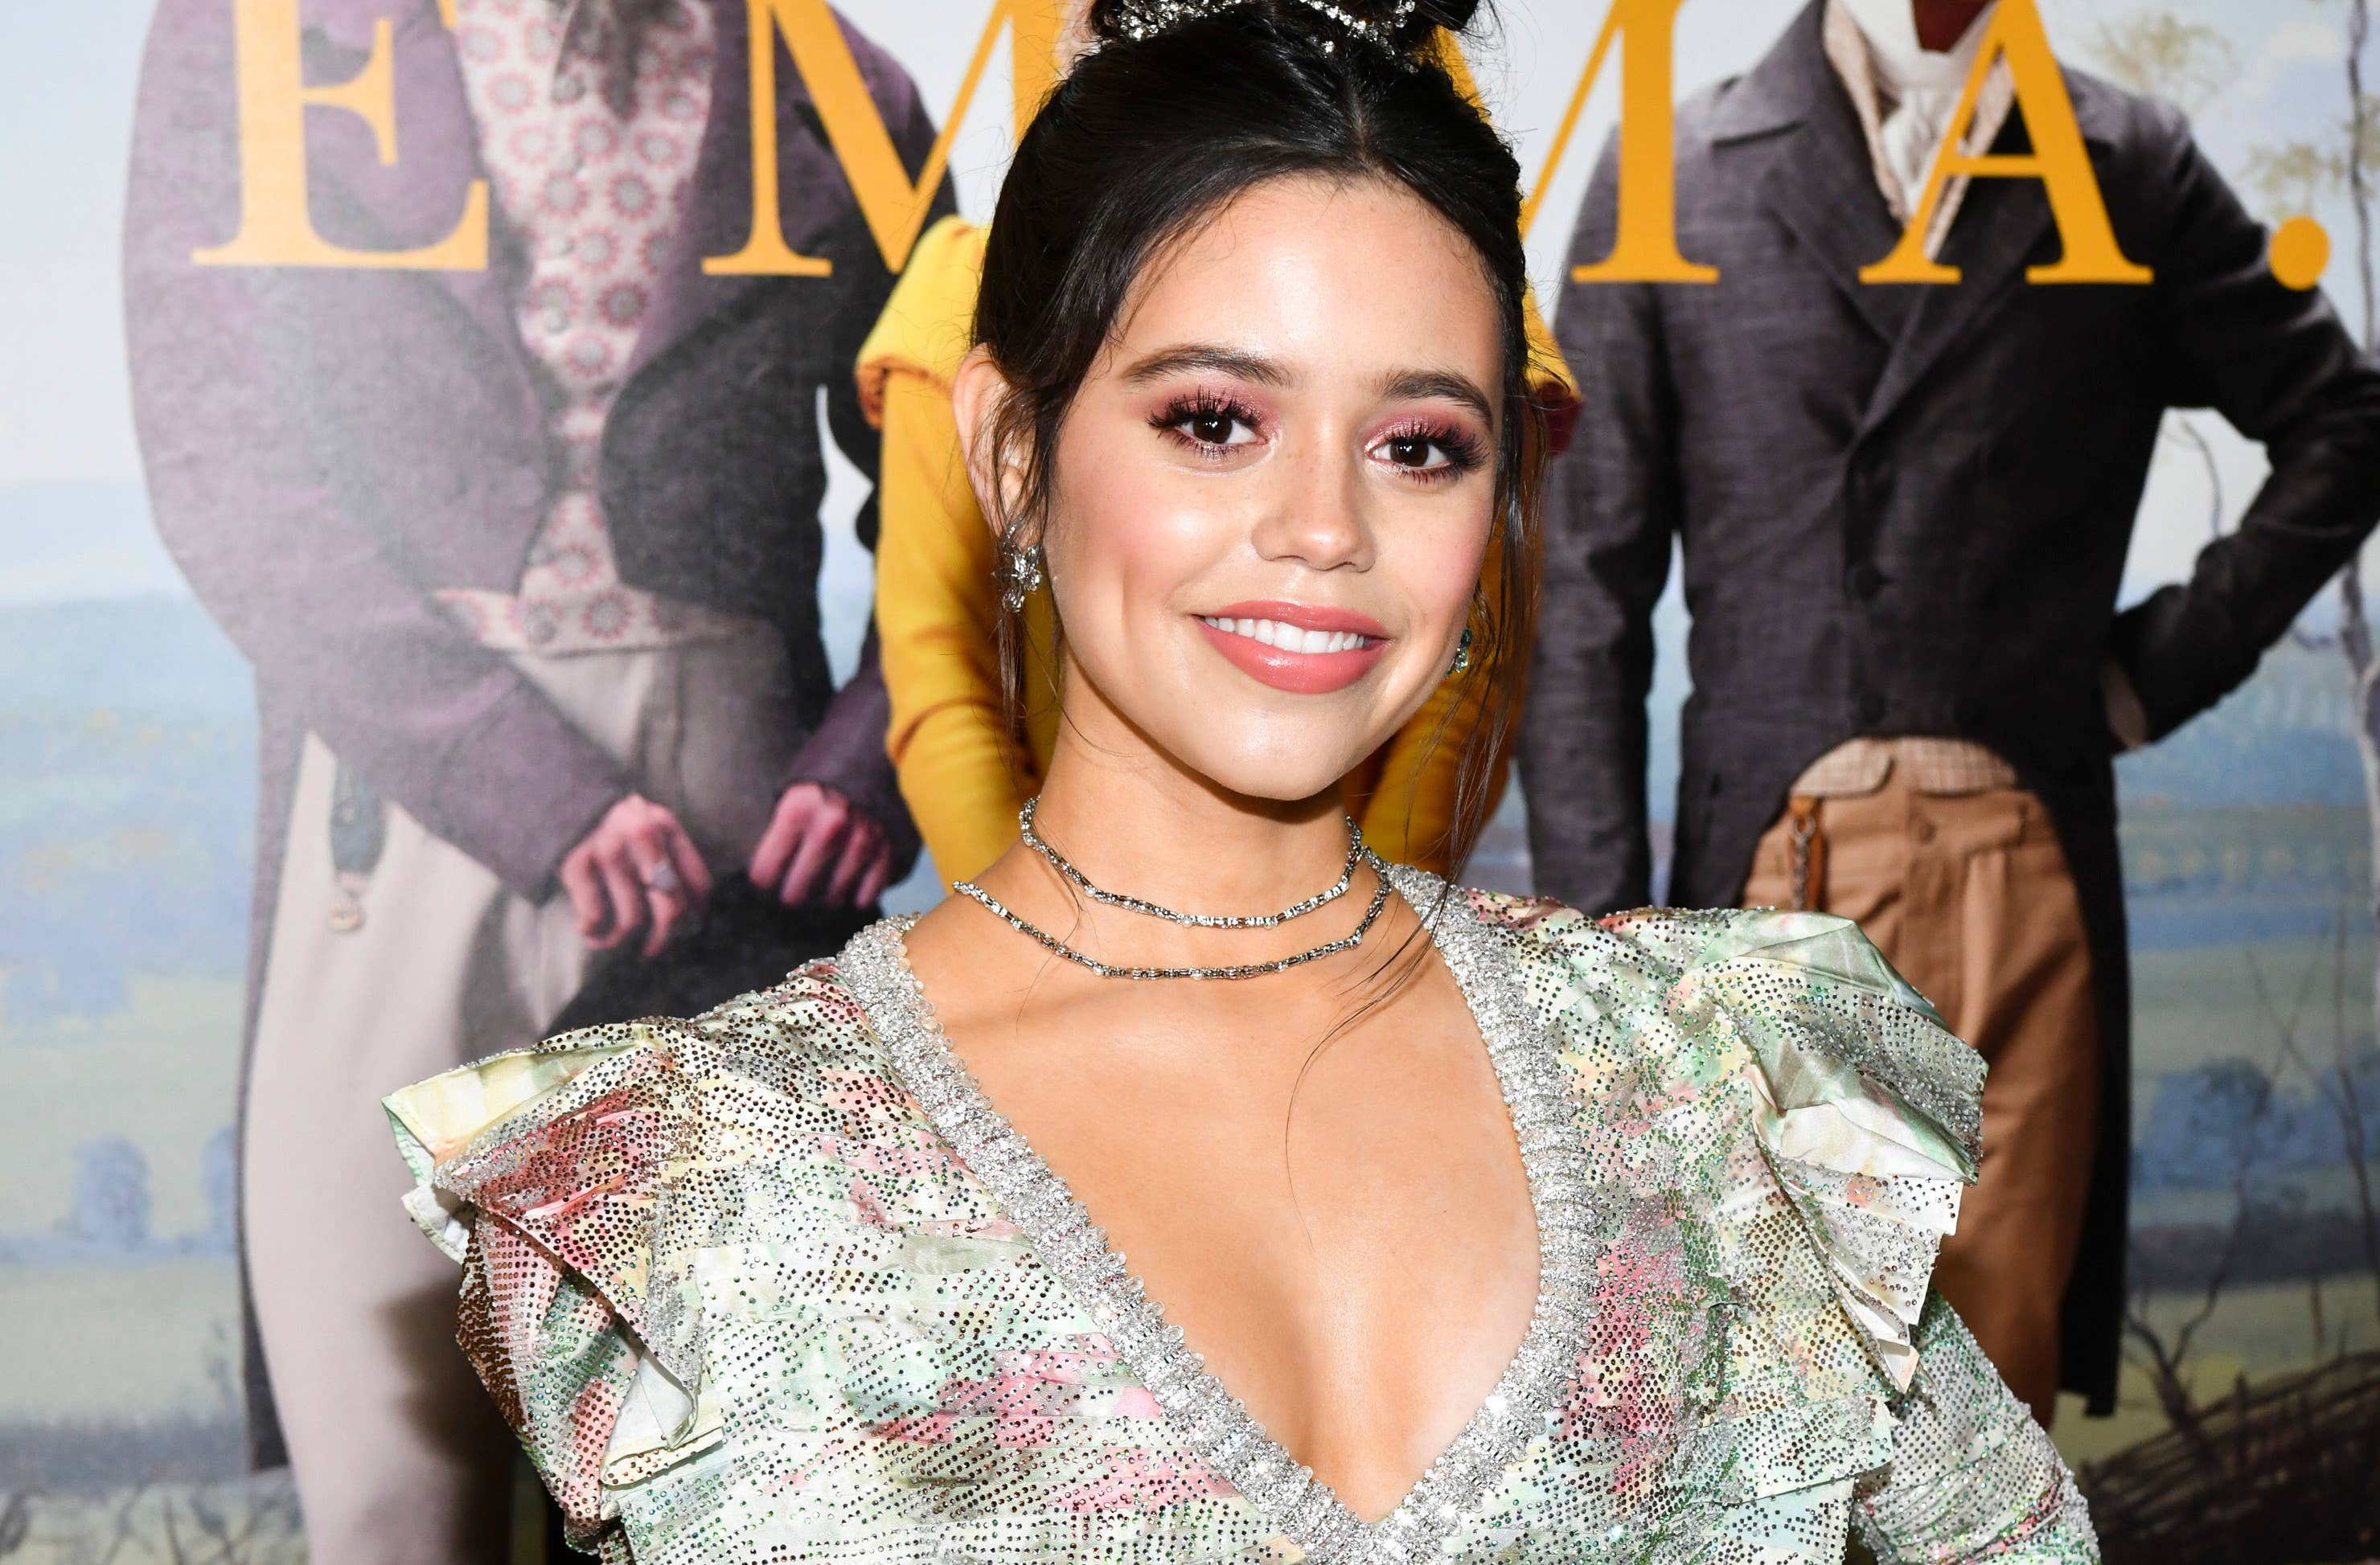 Gass Of 10th Class Xxx - Jenna Ortega Opens Up About Her Role in A24's New Horror Film 'X' | Complex